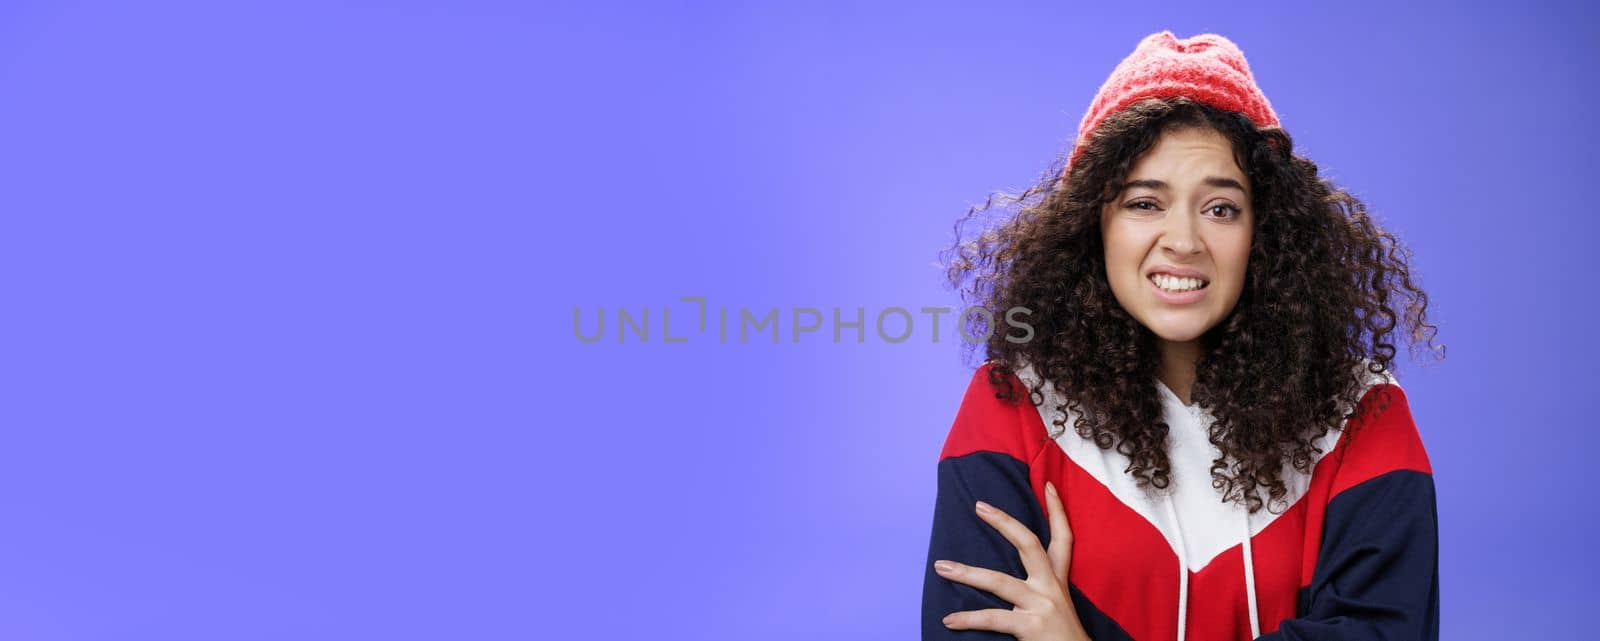 Woman with curly hair in winter beanie feeling uncomfortable and discomfort clenching teeth and frowning intense as hugging herself insecure and awkward, unwilling to say cruel rejection, feel awkward.